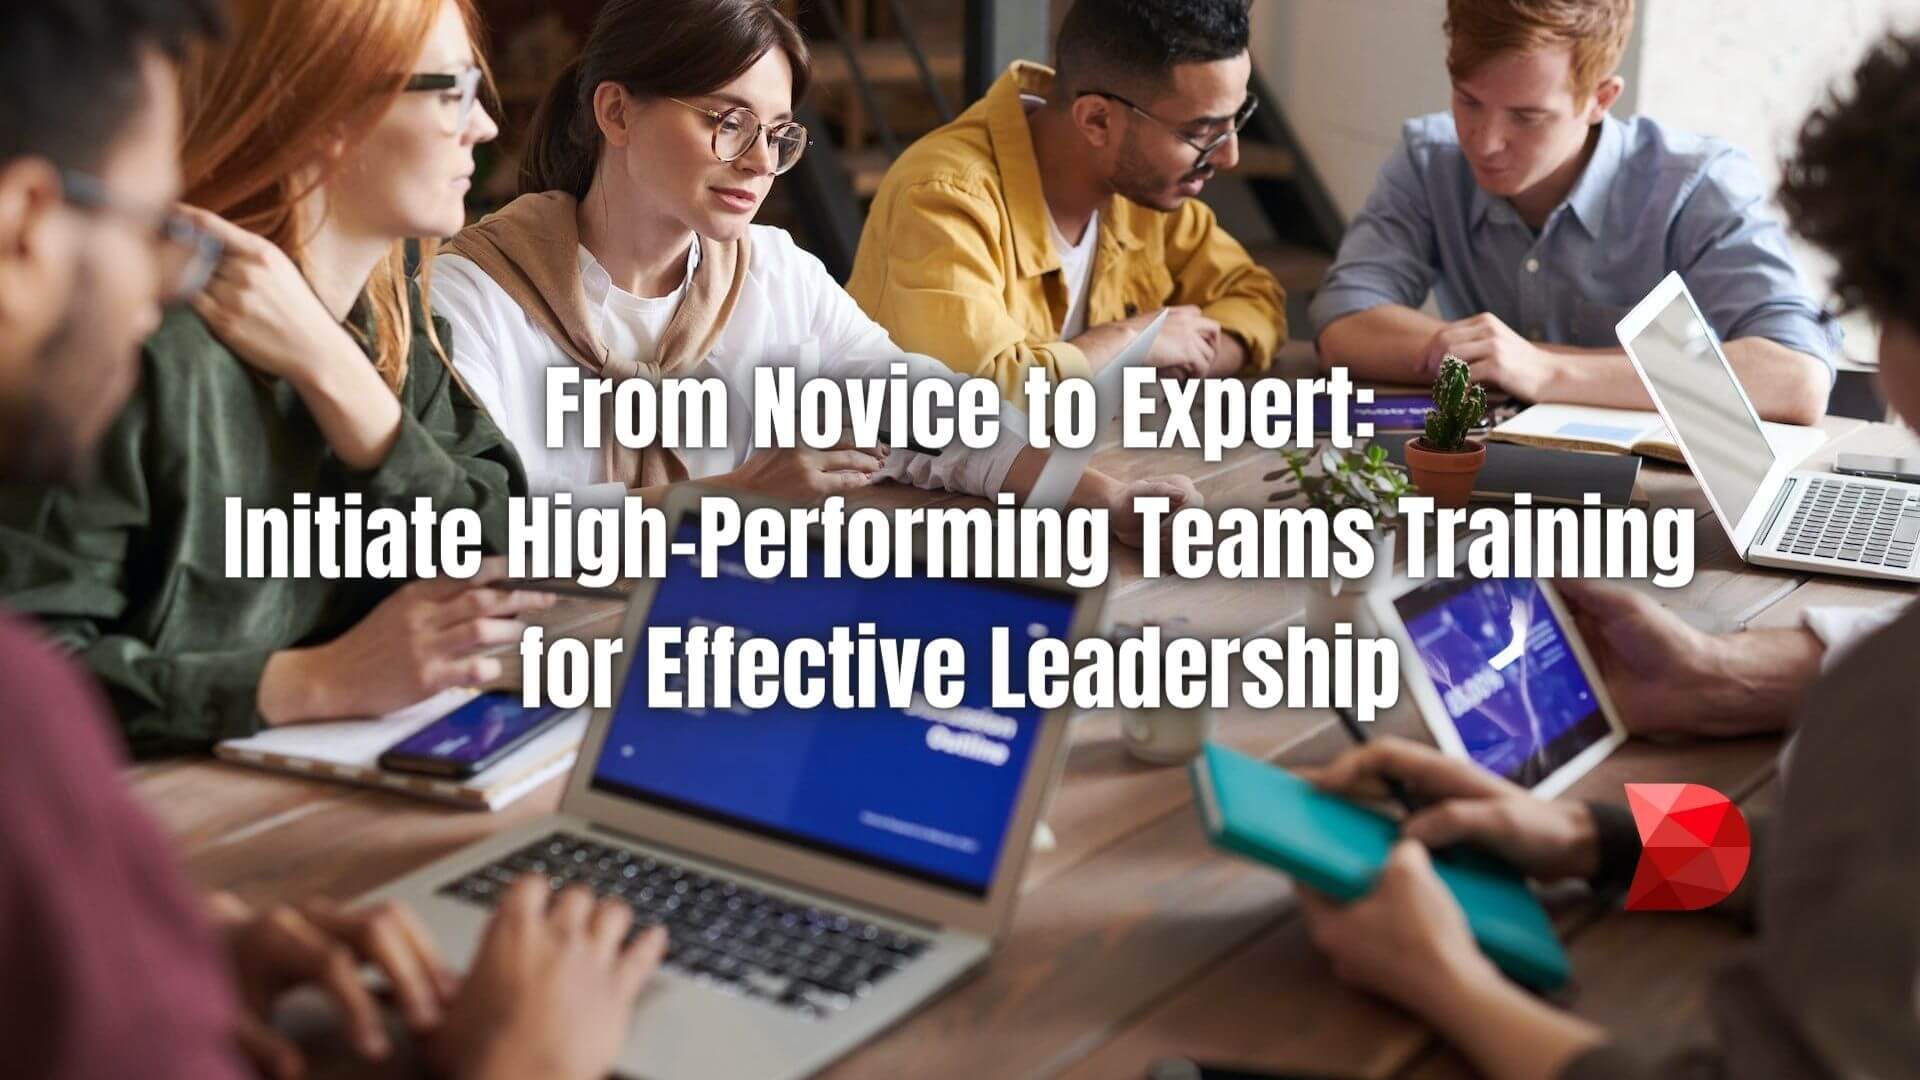 Master effective leadership with this guide to high-performing teams training. Click here to elevate your leadership skills today!